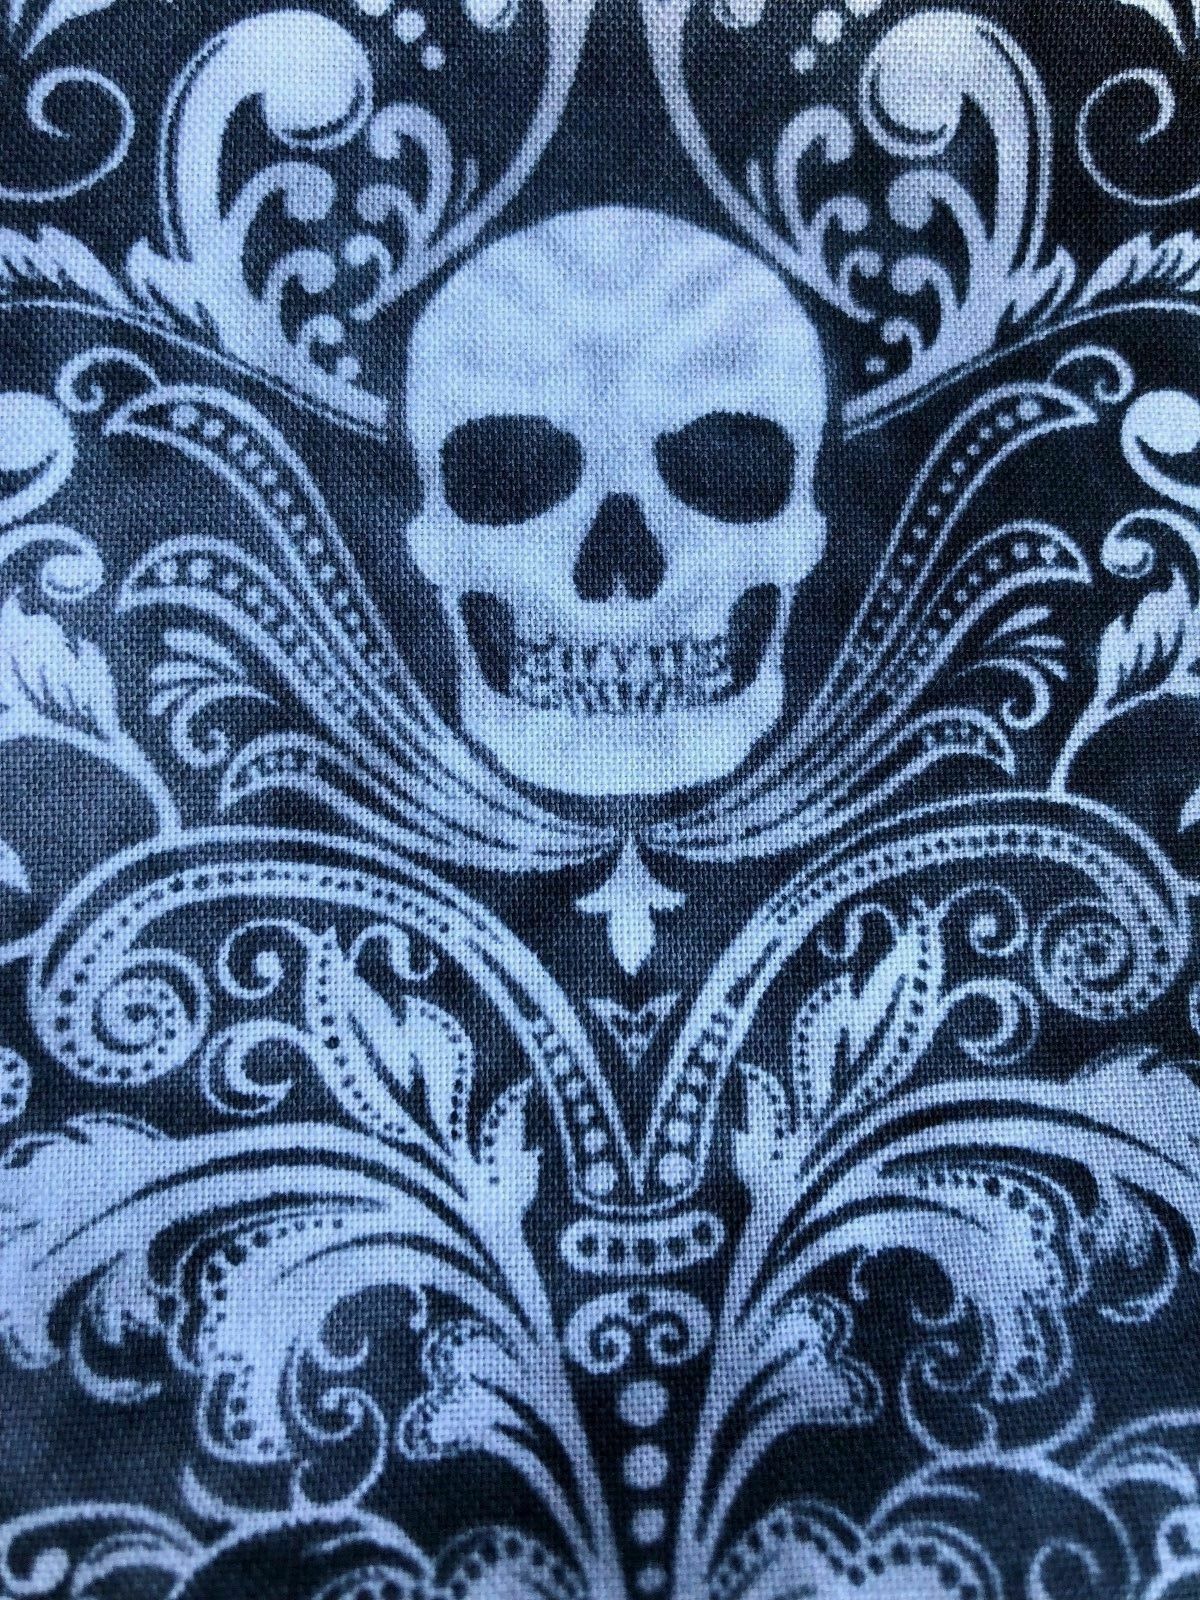 Gothic Filigree Skull Timeless Treasures 100% Cotton Fabric Ideal For Face Masks